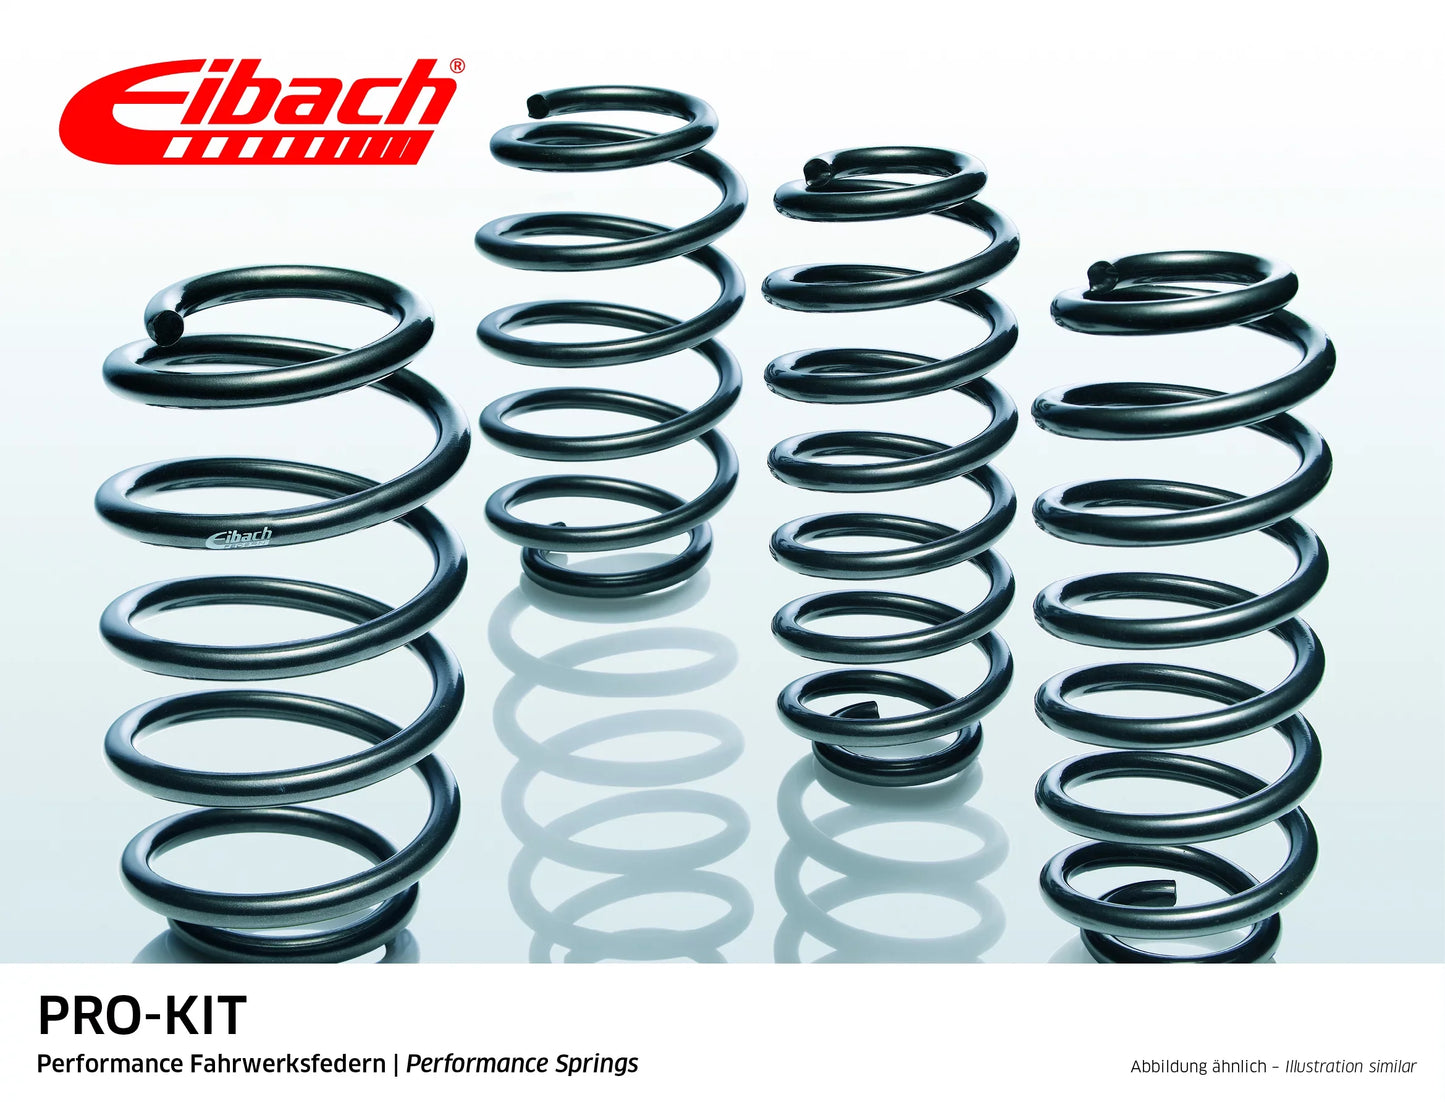 Eibach Pro-Kit Lowering Springs (E10-15-003-01-22) at £244.80